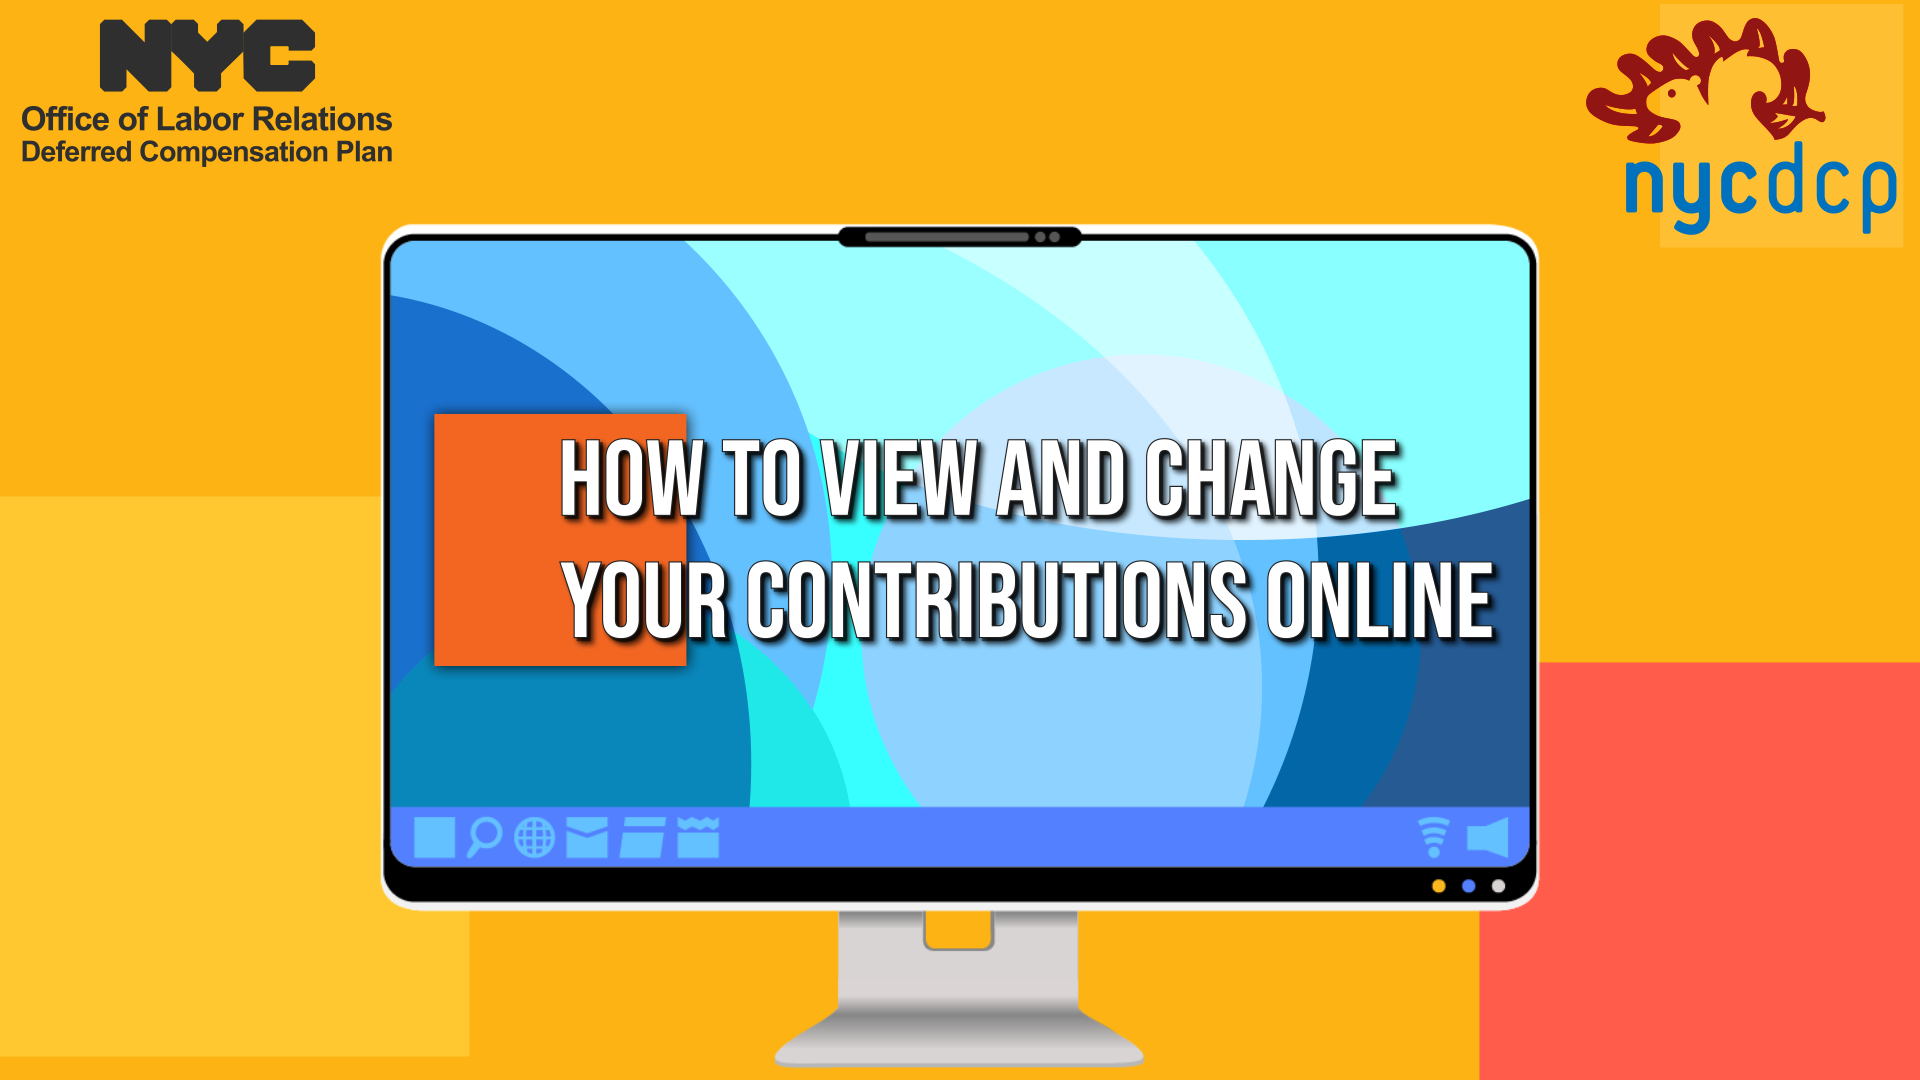 The words "How to View and Change Your Contributions Online" on a computer screen